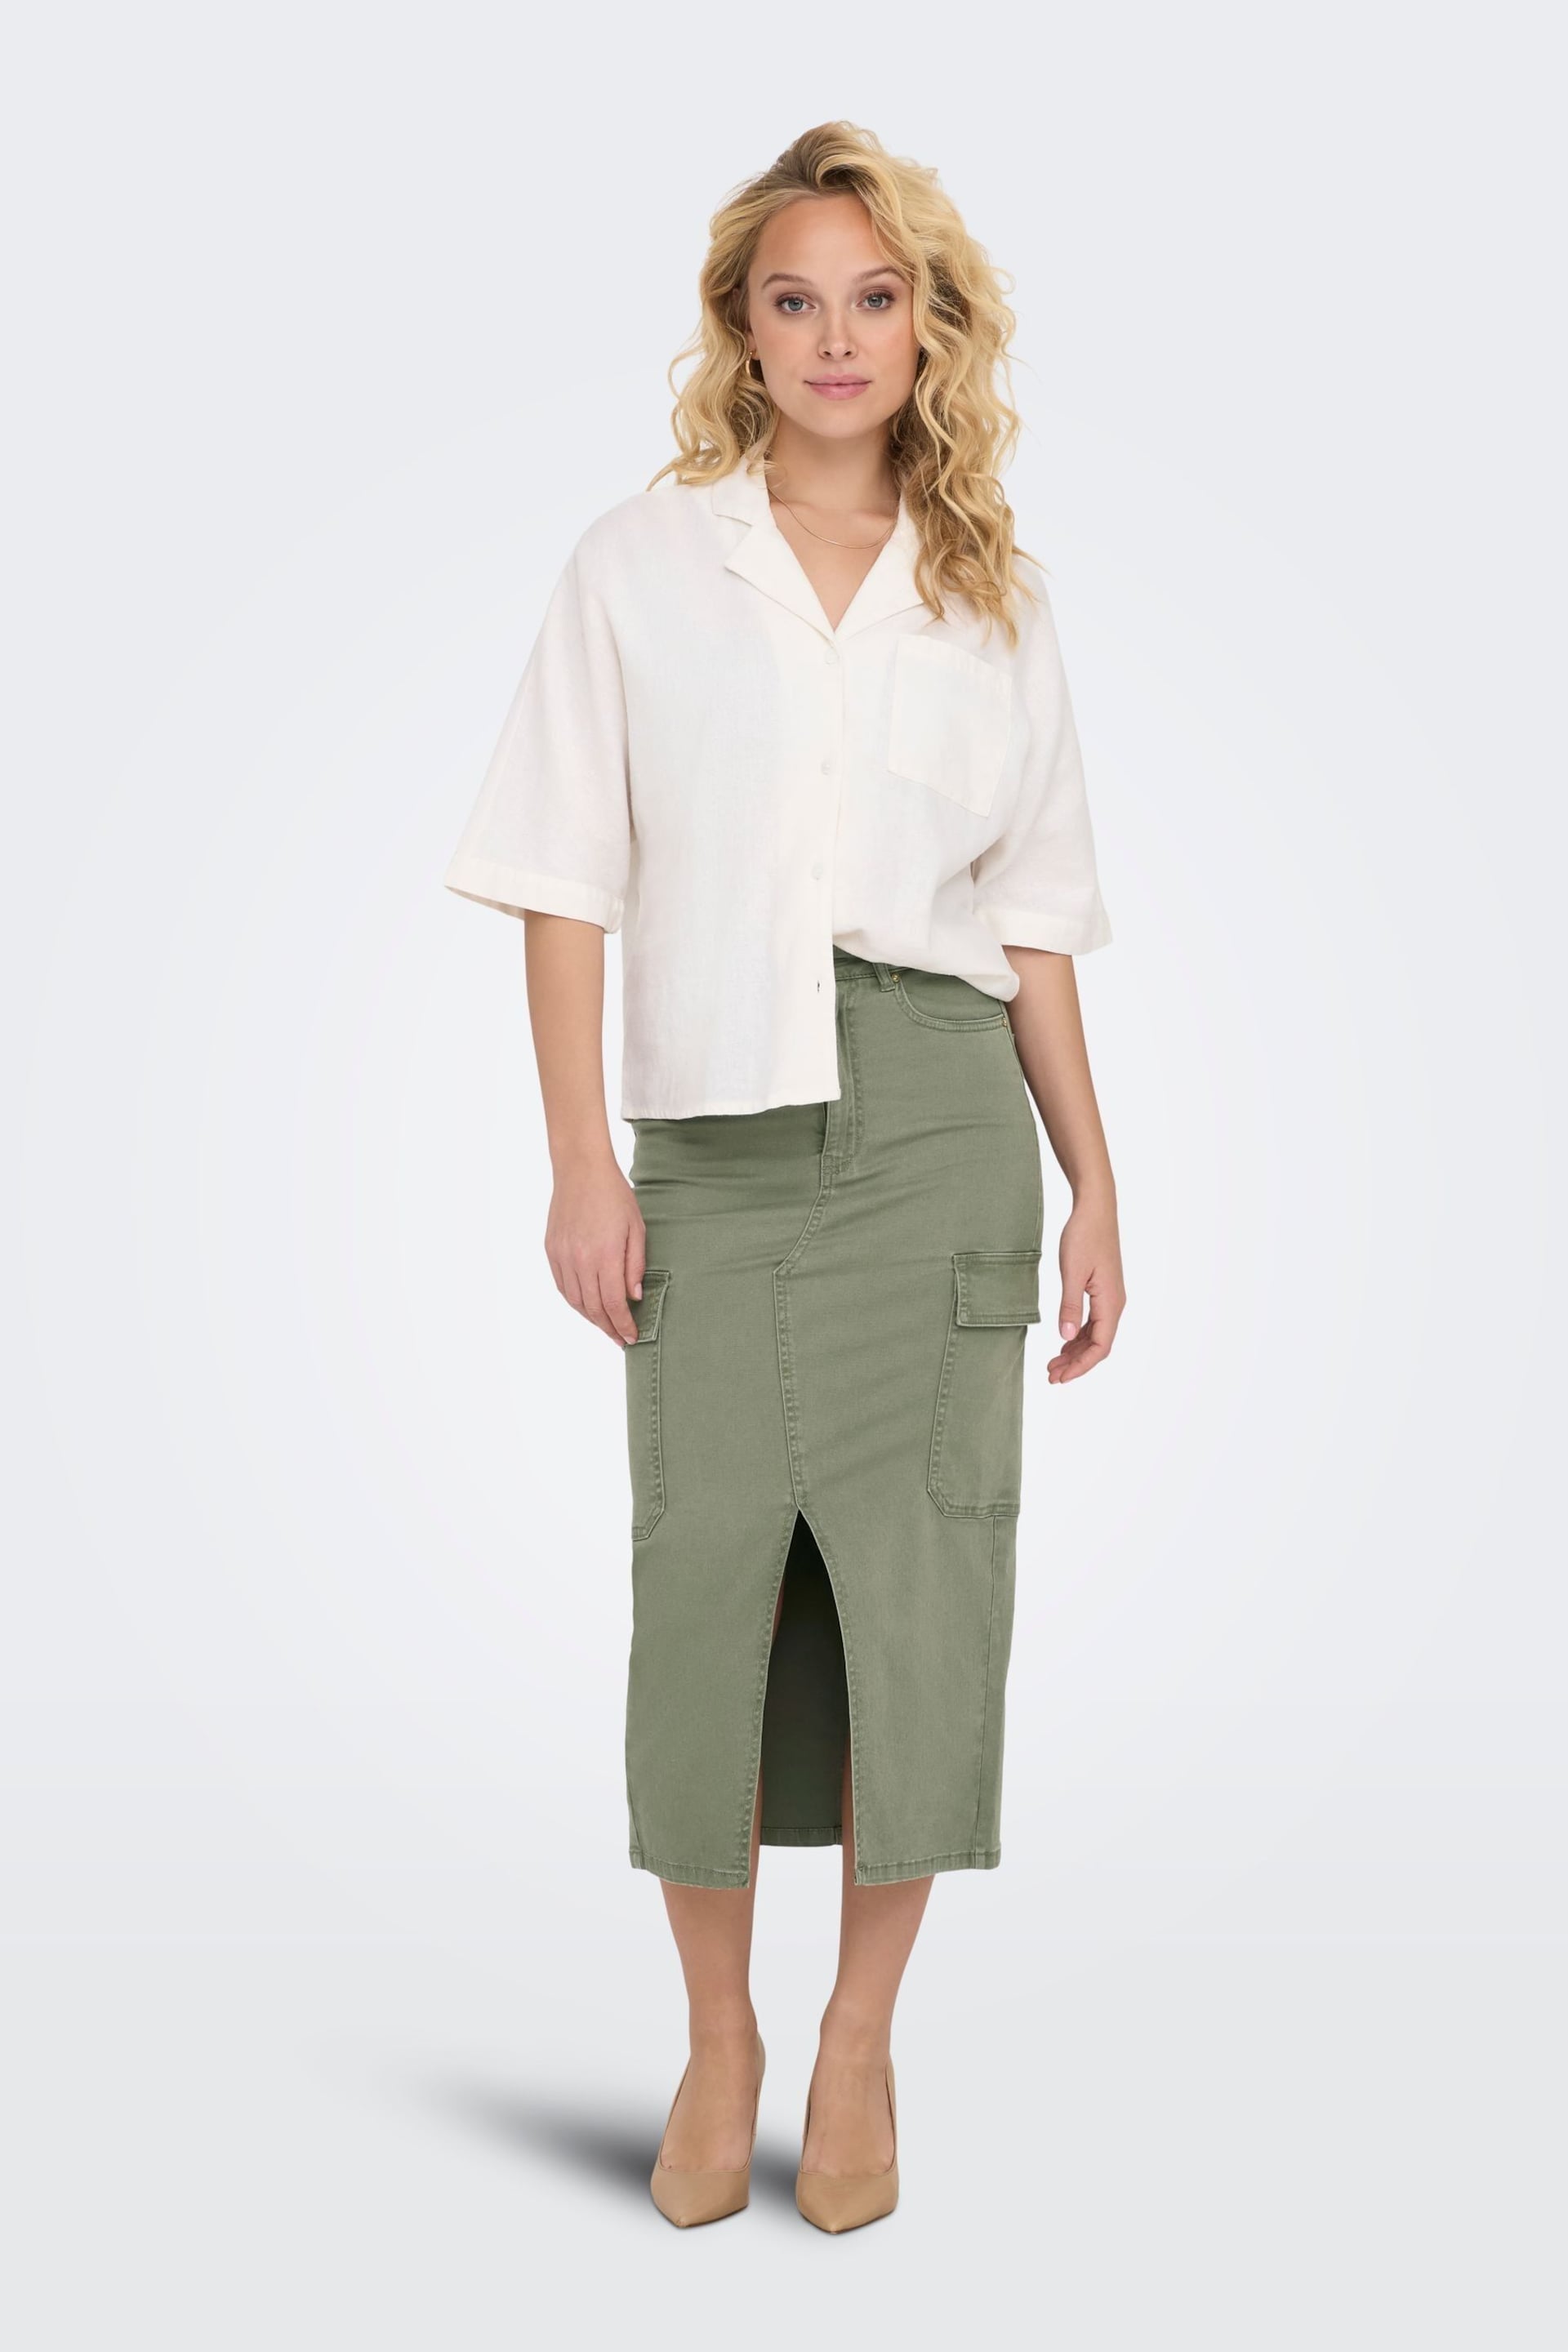 ONLY Green Utility Midi Skirt With Front Split - Image 6 of 8